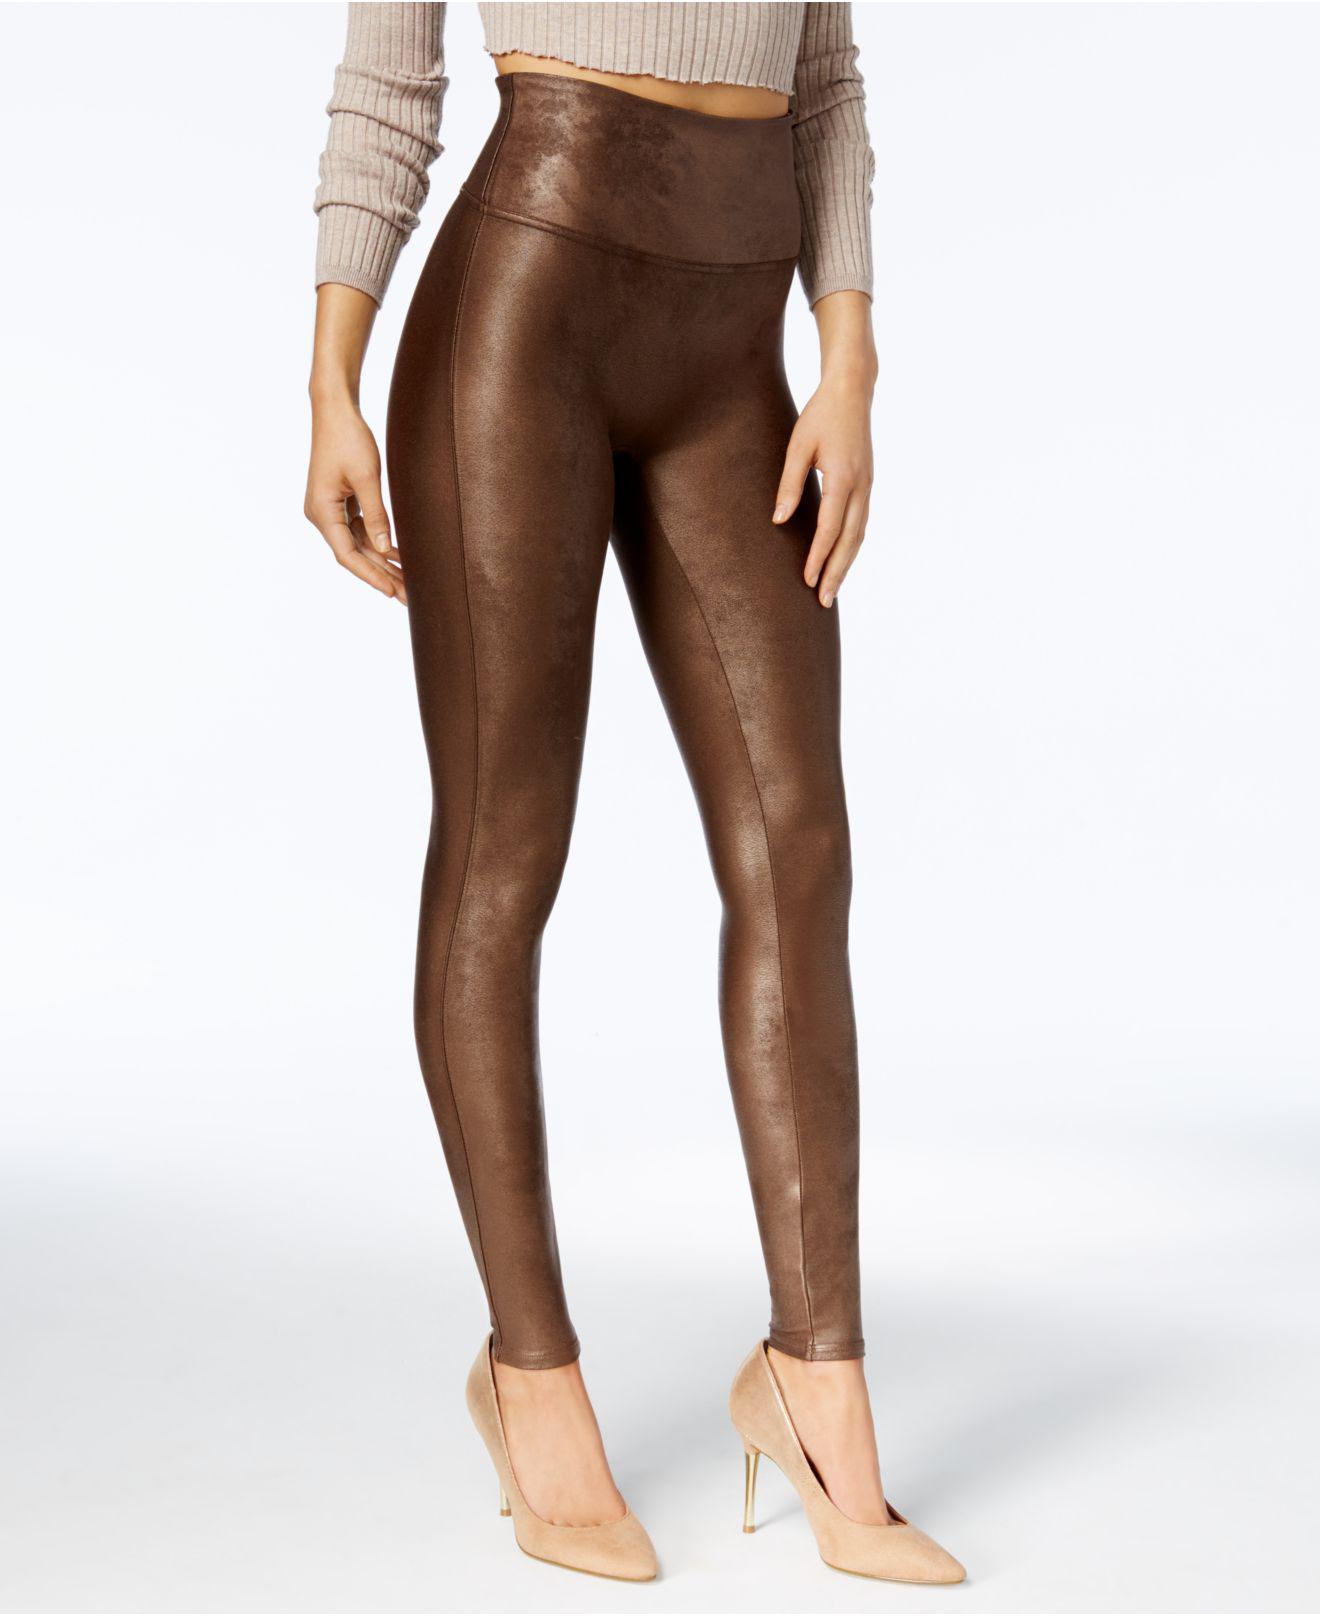 do spanx leggings stretch out over timer